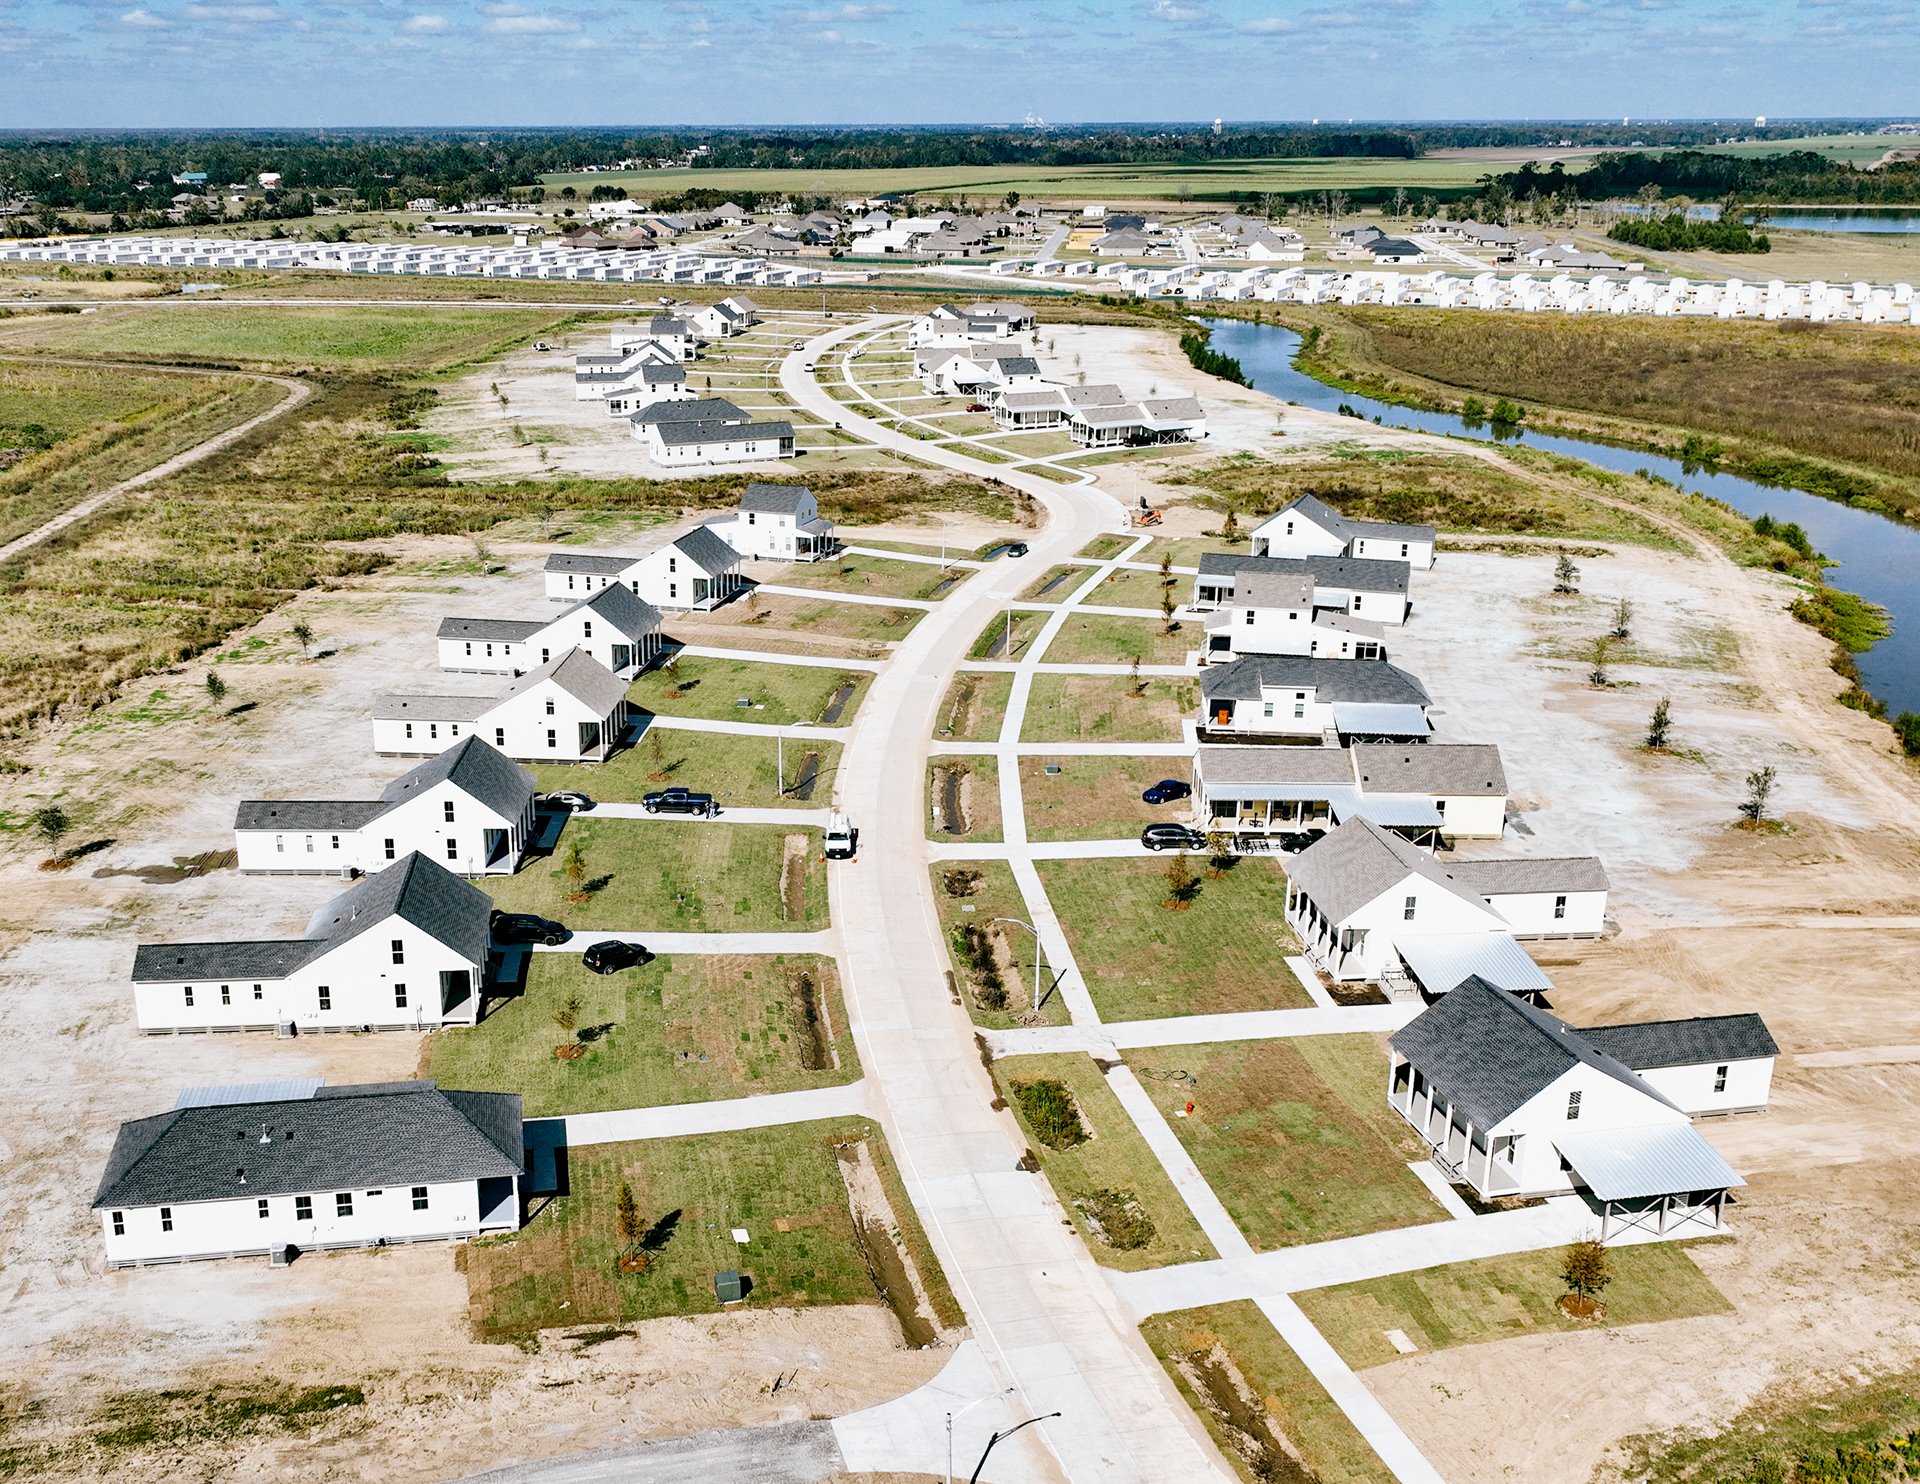 In 2022, residents of Isle de Jean-Charles relocated 65 km north to Gray, where they received free housing in a development on an old sugar plantation, consisting of 37 houses. However, they now face financial strain as they must pay taxes and insurance, which can be particularly challenging for those on social benefits. Eligibility for this housing was limited to residents present during Hurricane Isaac in 2012 or those who settled afterward. Others displaced by previous disasters must cover the costs of constructing their homes. Gray, Louisiana, United States.